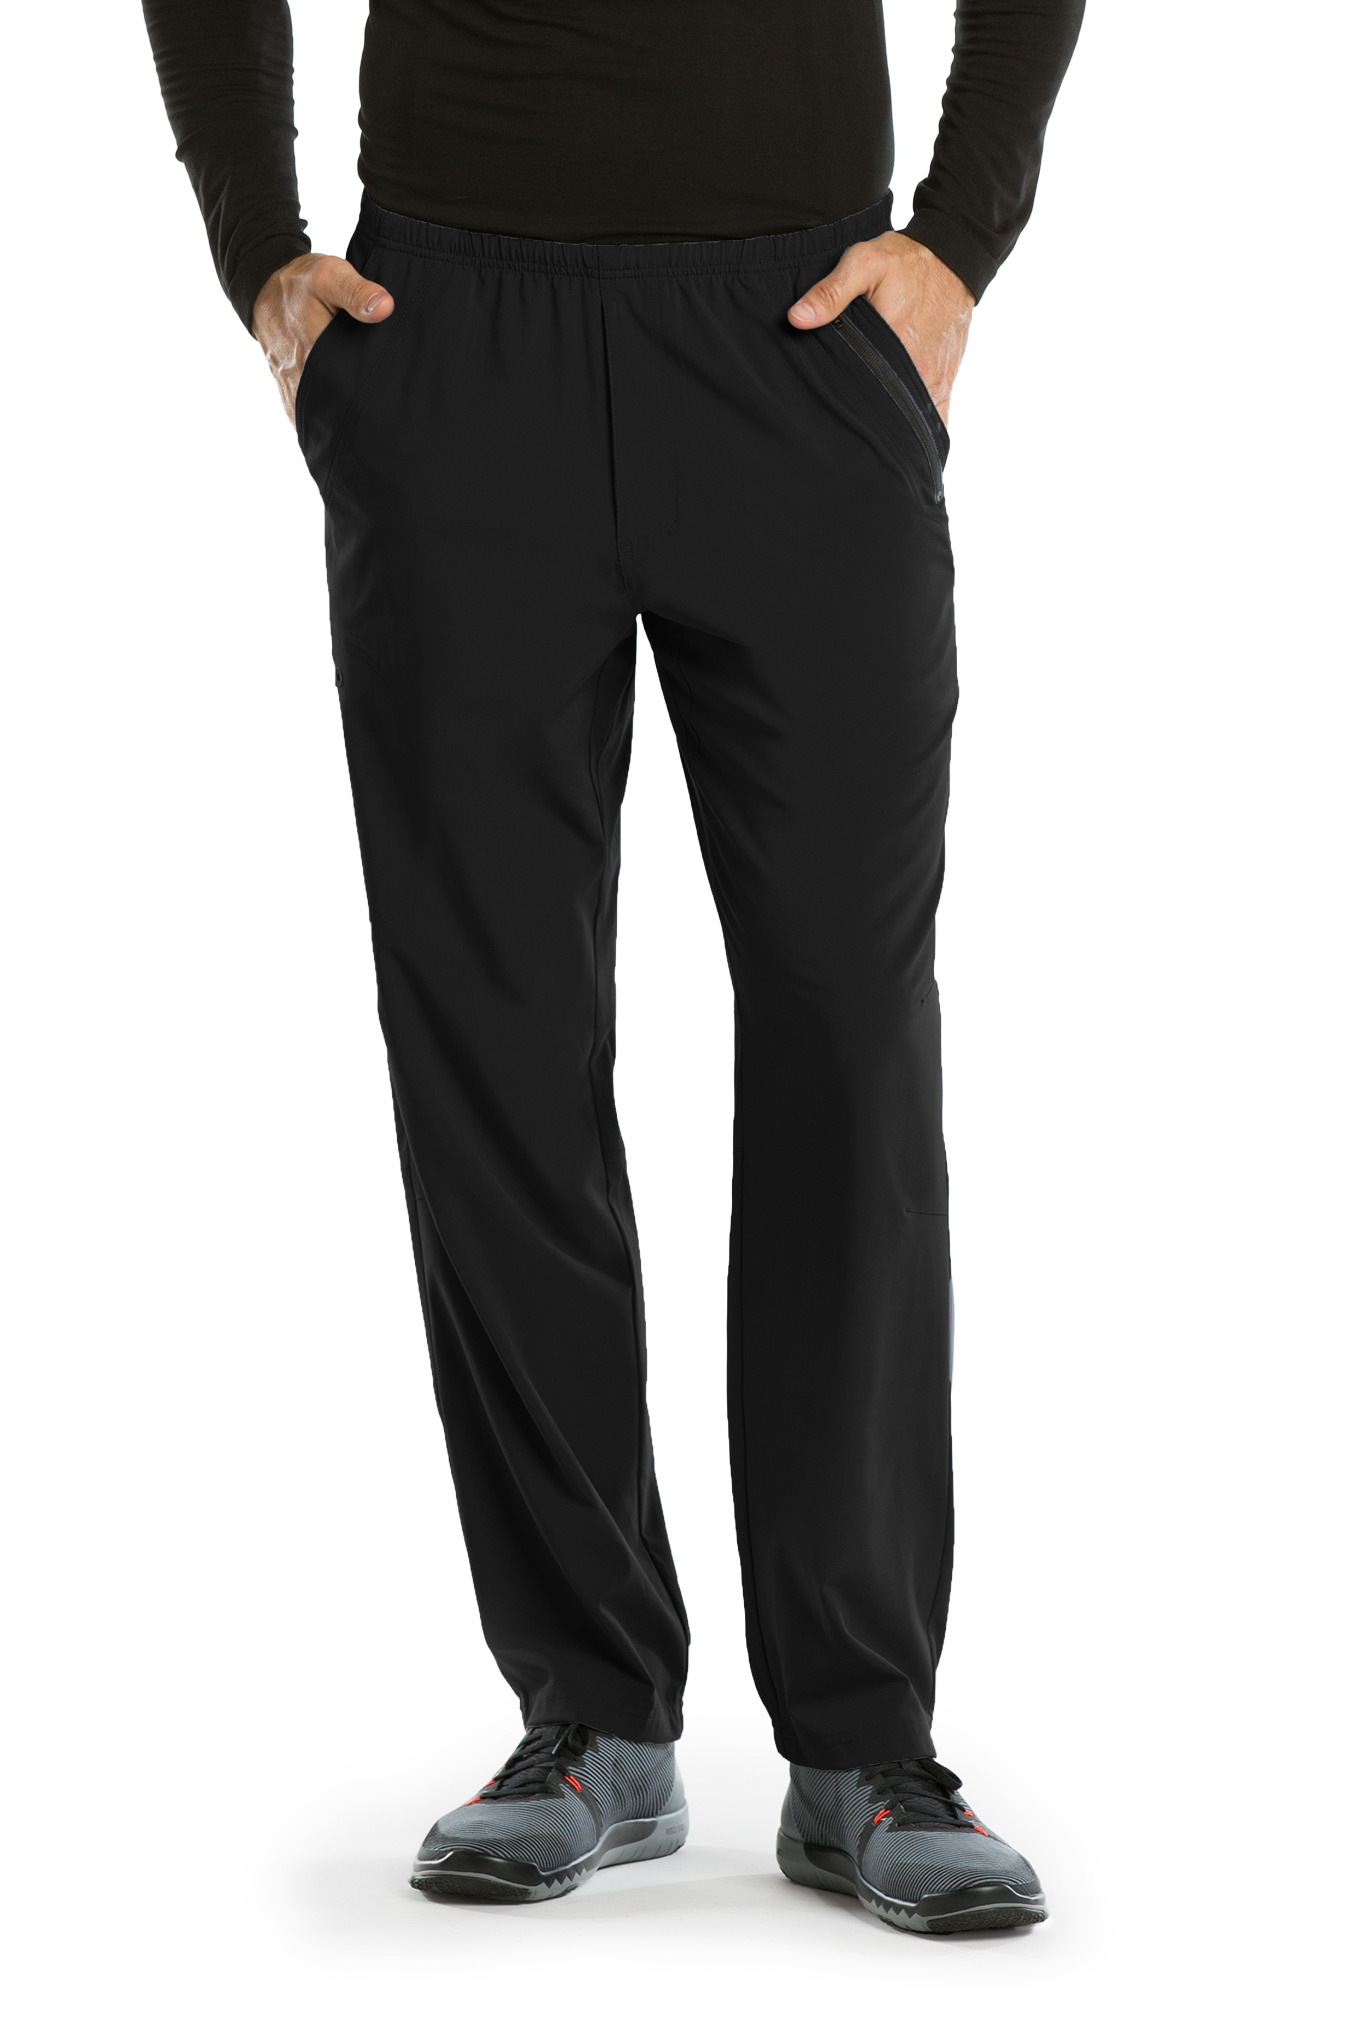 Barco One Amplify Pant-Barco One